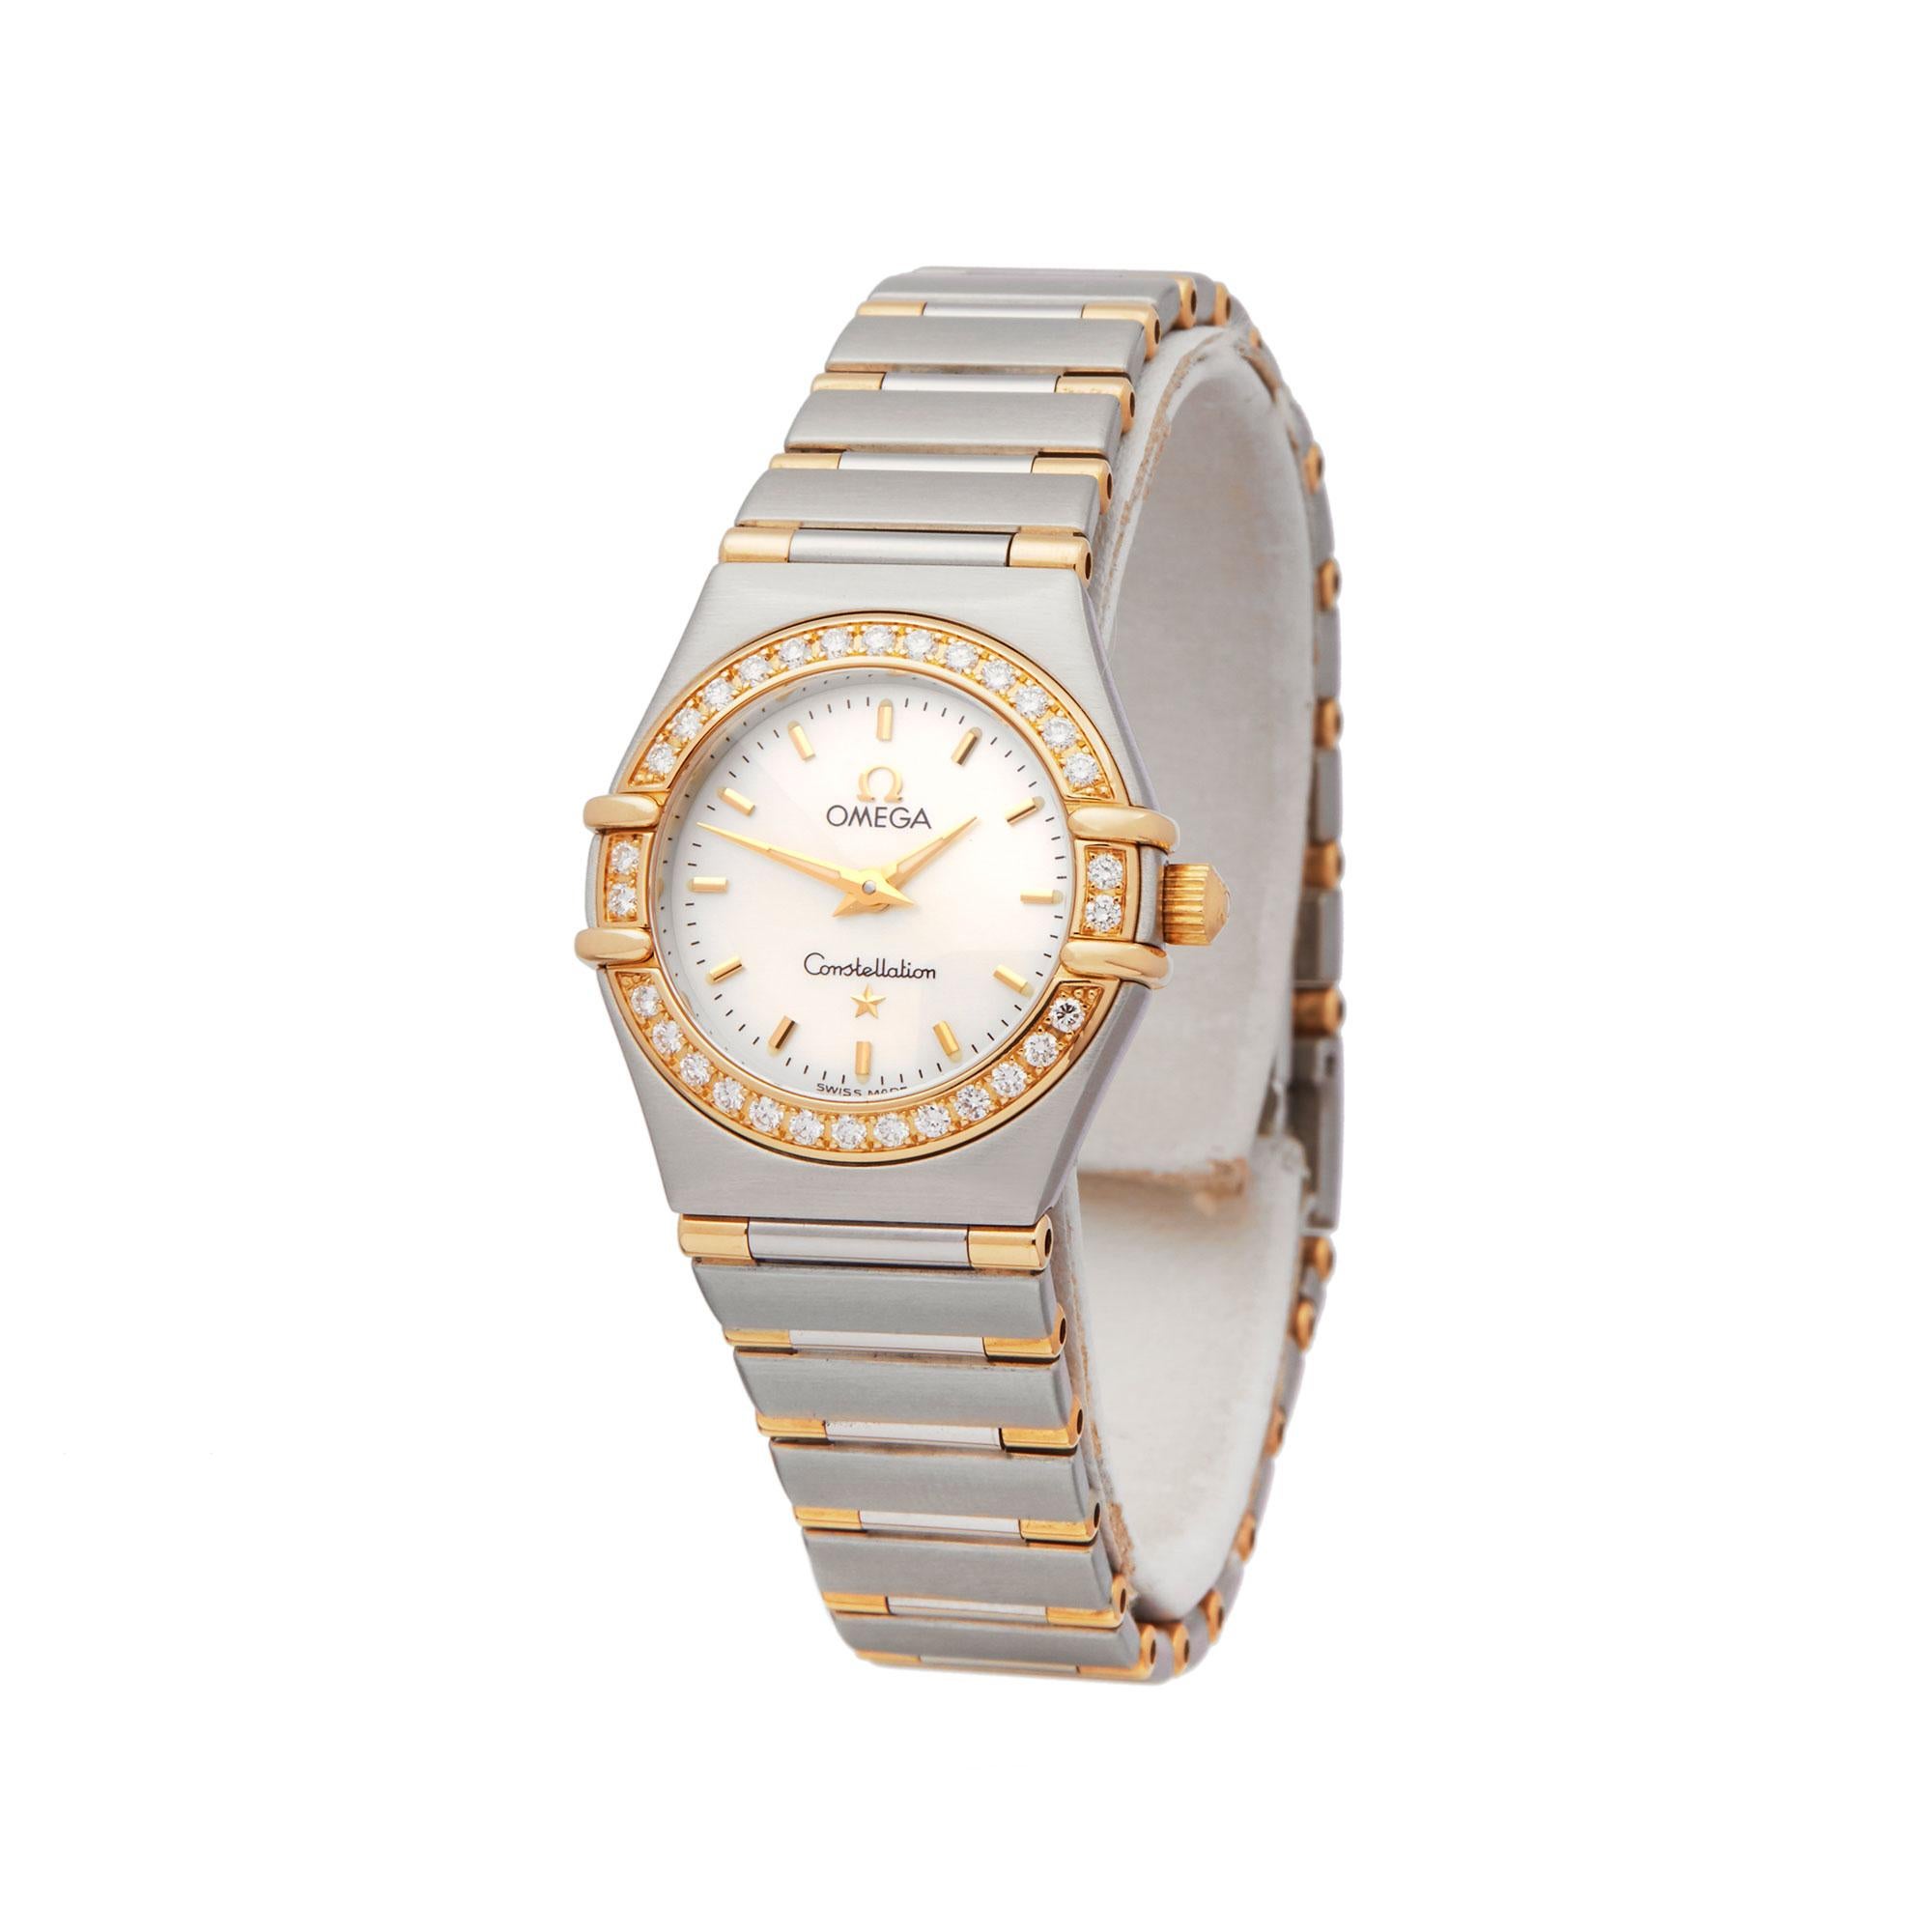 Reference: COM1956
Manufacturer: Omega
Model: Constellation
Model Reference: 1277.3
Age: Circa 2000's
Gender: Women's
Box and Papers: Presentation Box
Dial: White Baton
Glass: Sapphire Crystal
Movement: Quartz
Water Resistance: To Manufacturers